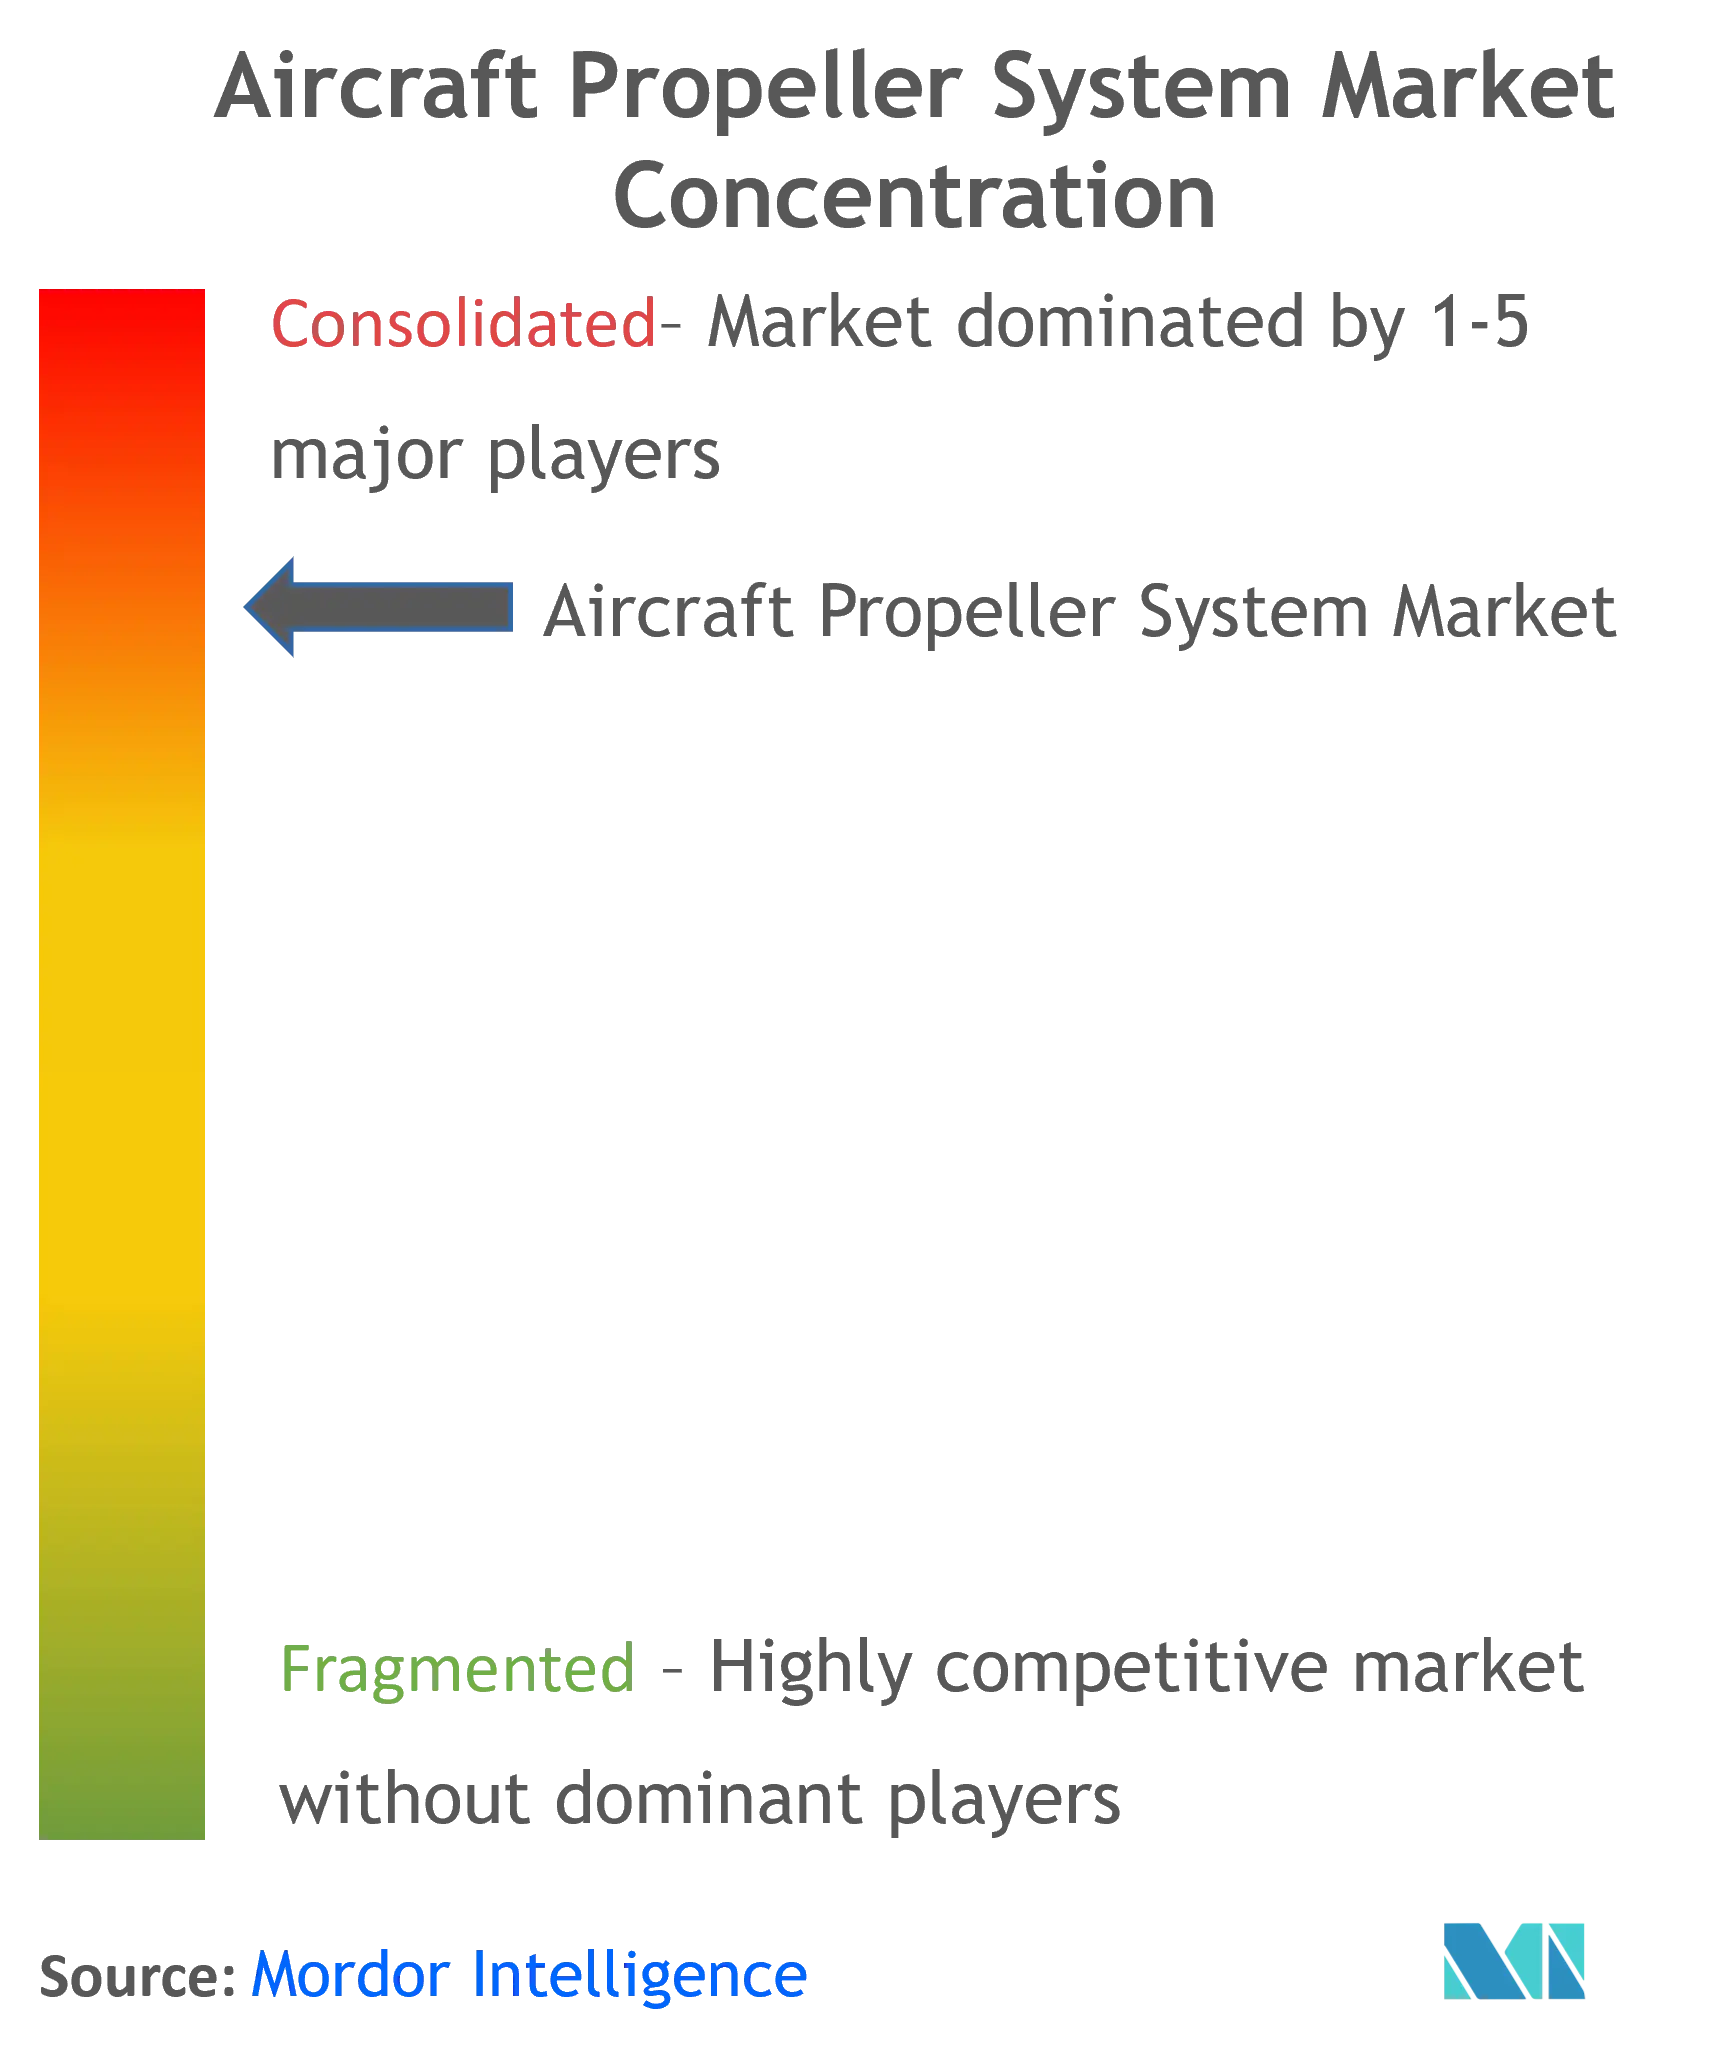 Aircraft Propeller Systems Market Concentration